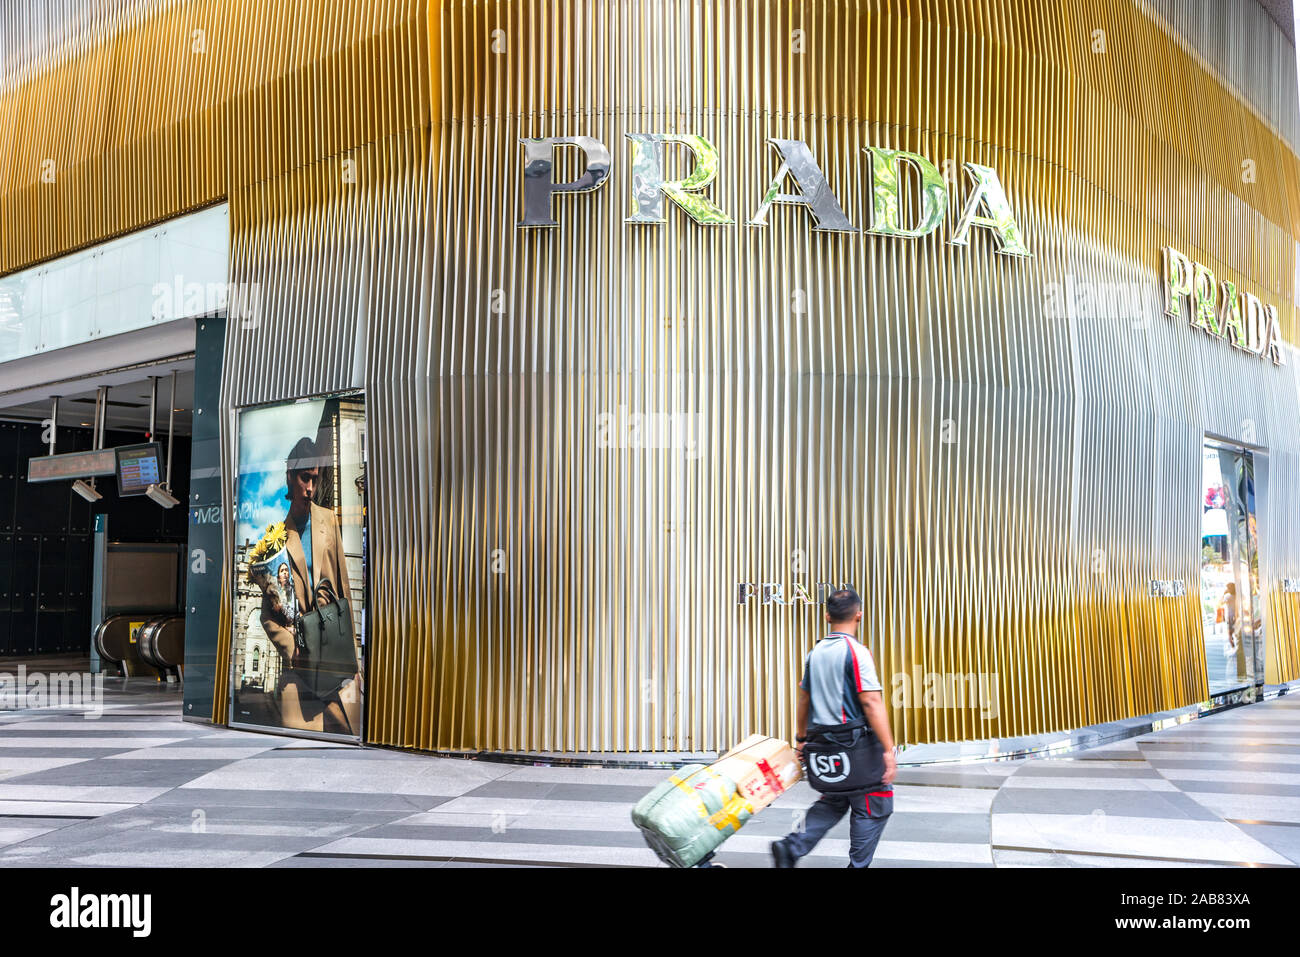 Prada store in new shopping mall. Prada S.p.A. is an Italian luxury fashion  house founded in 1913. One Asian delivery male can be seen Stock Photo -  Alamy